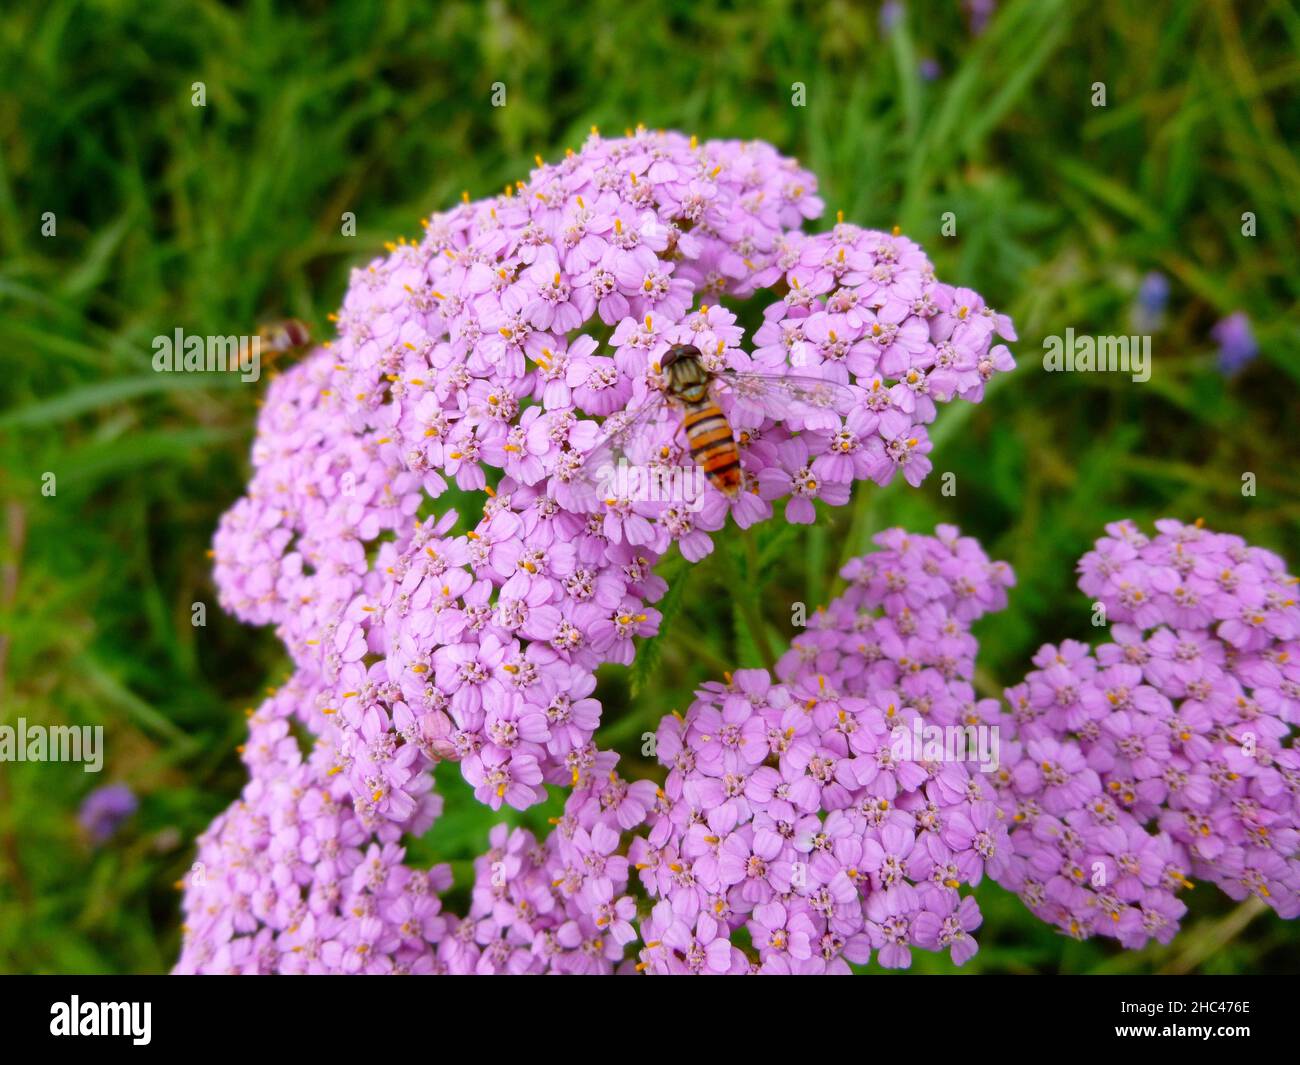 https://c8.alamy.com/comp/2HC476E/pink-flowers-of-yarrow-close-up-achillea-millefolium-plant-grows-in-a-meadow-in-siberia-russia-striped-wasps-collecting-nectar-2HC476E.jpg